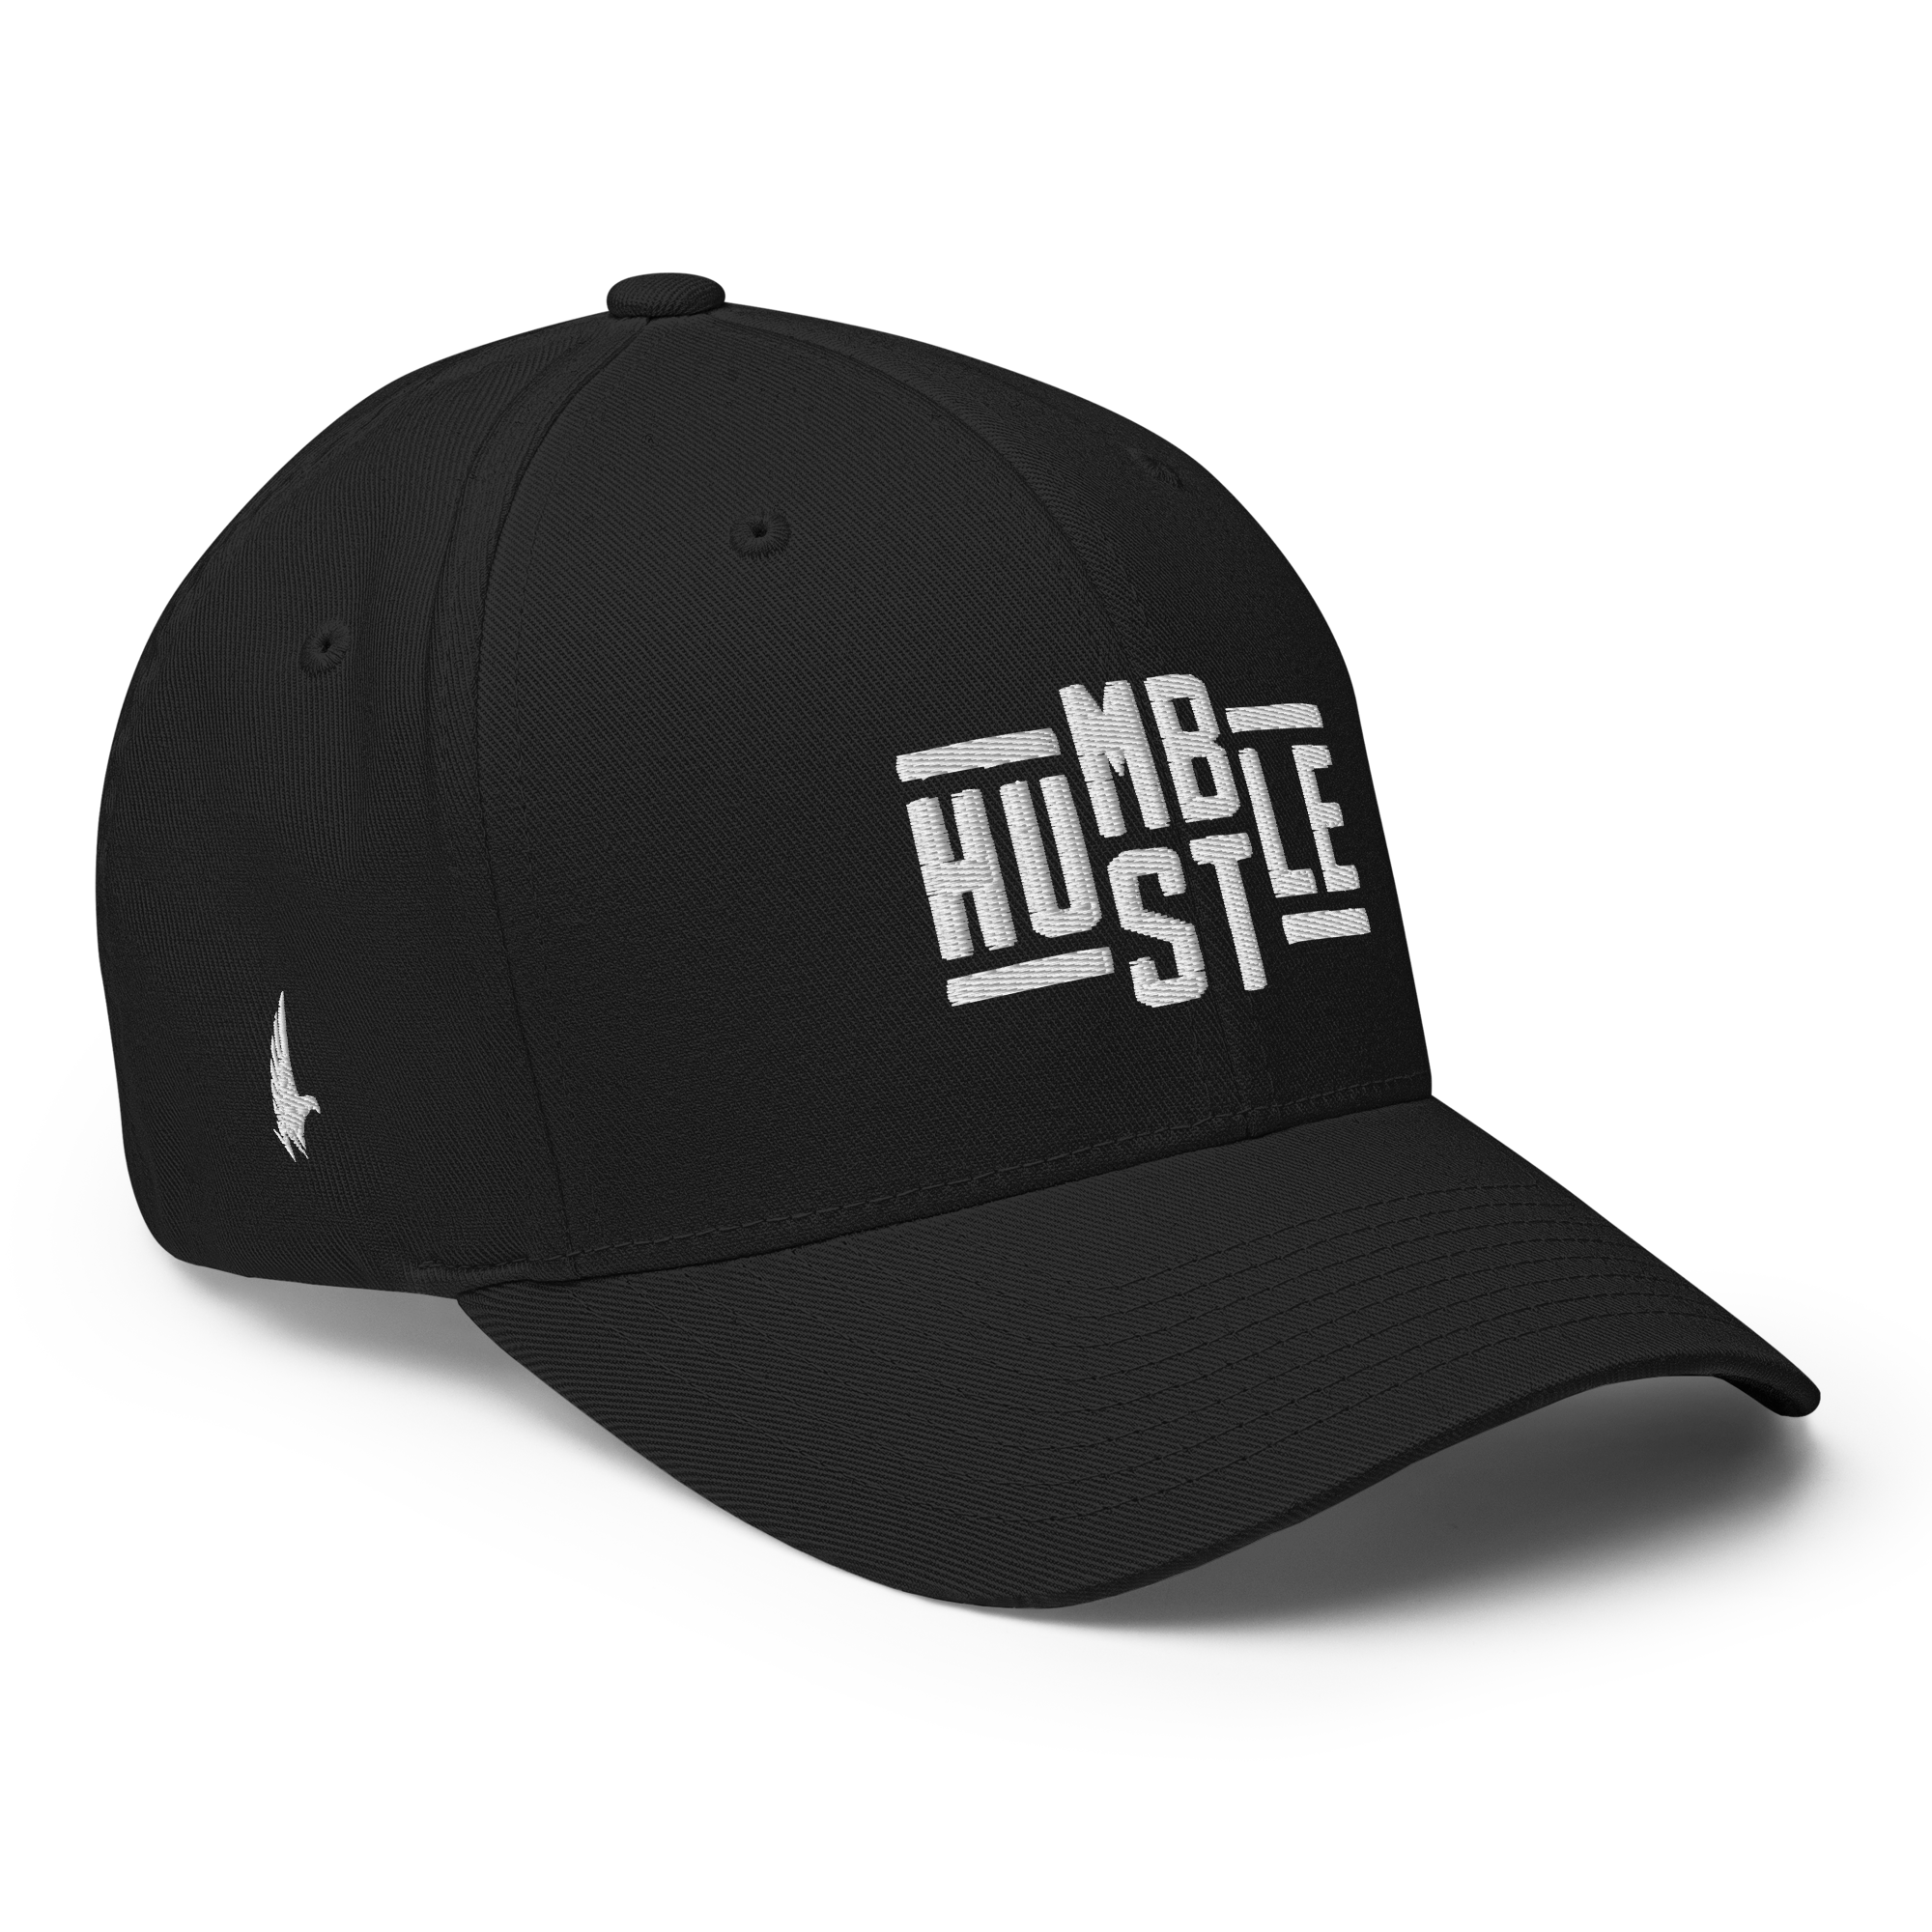 Loyalty Vibes Hustle Fitted Hat Black Fitted - Loyalty Vibes